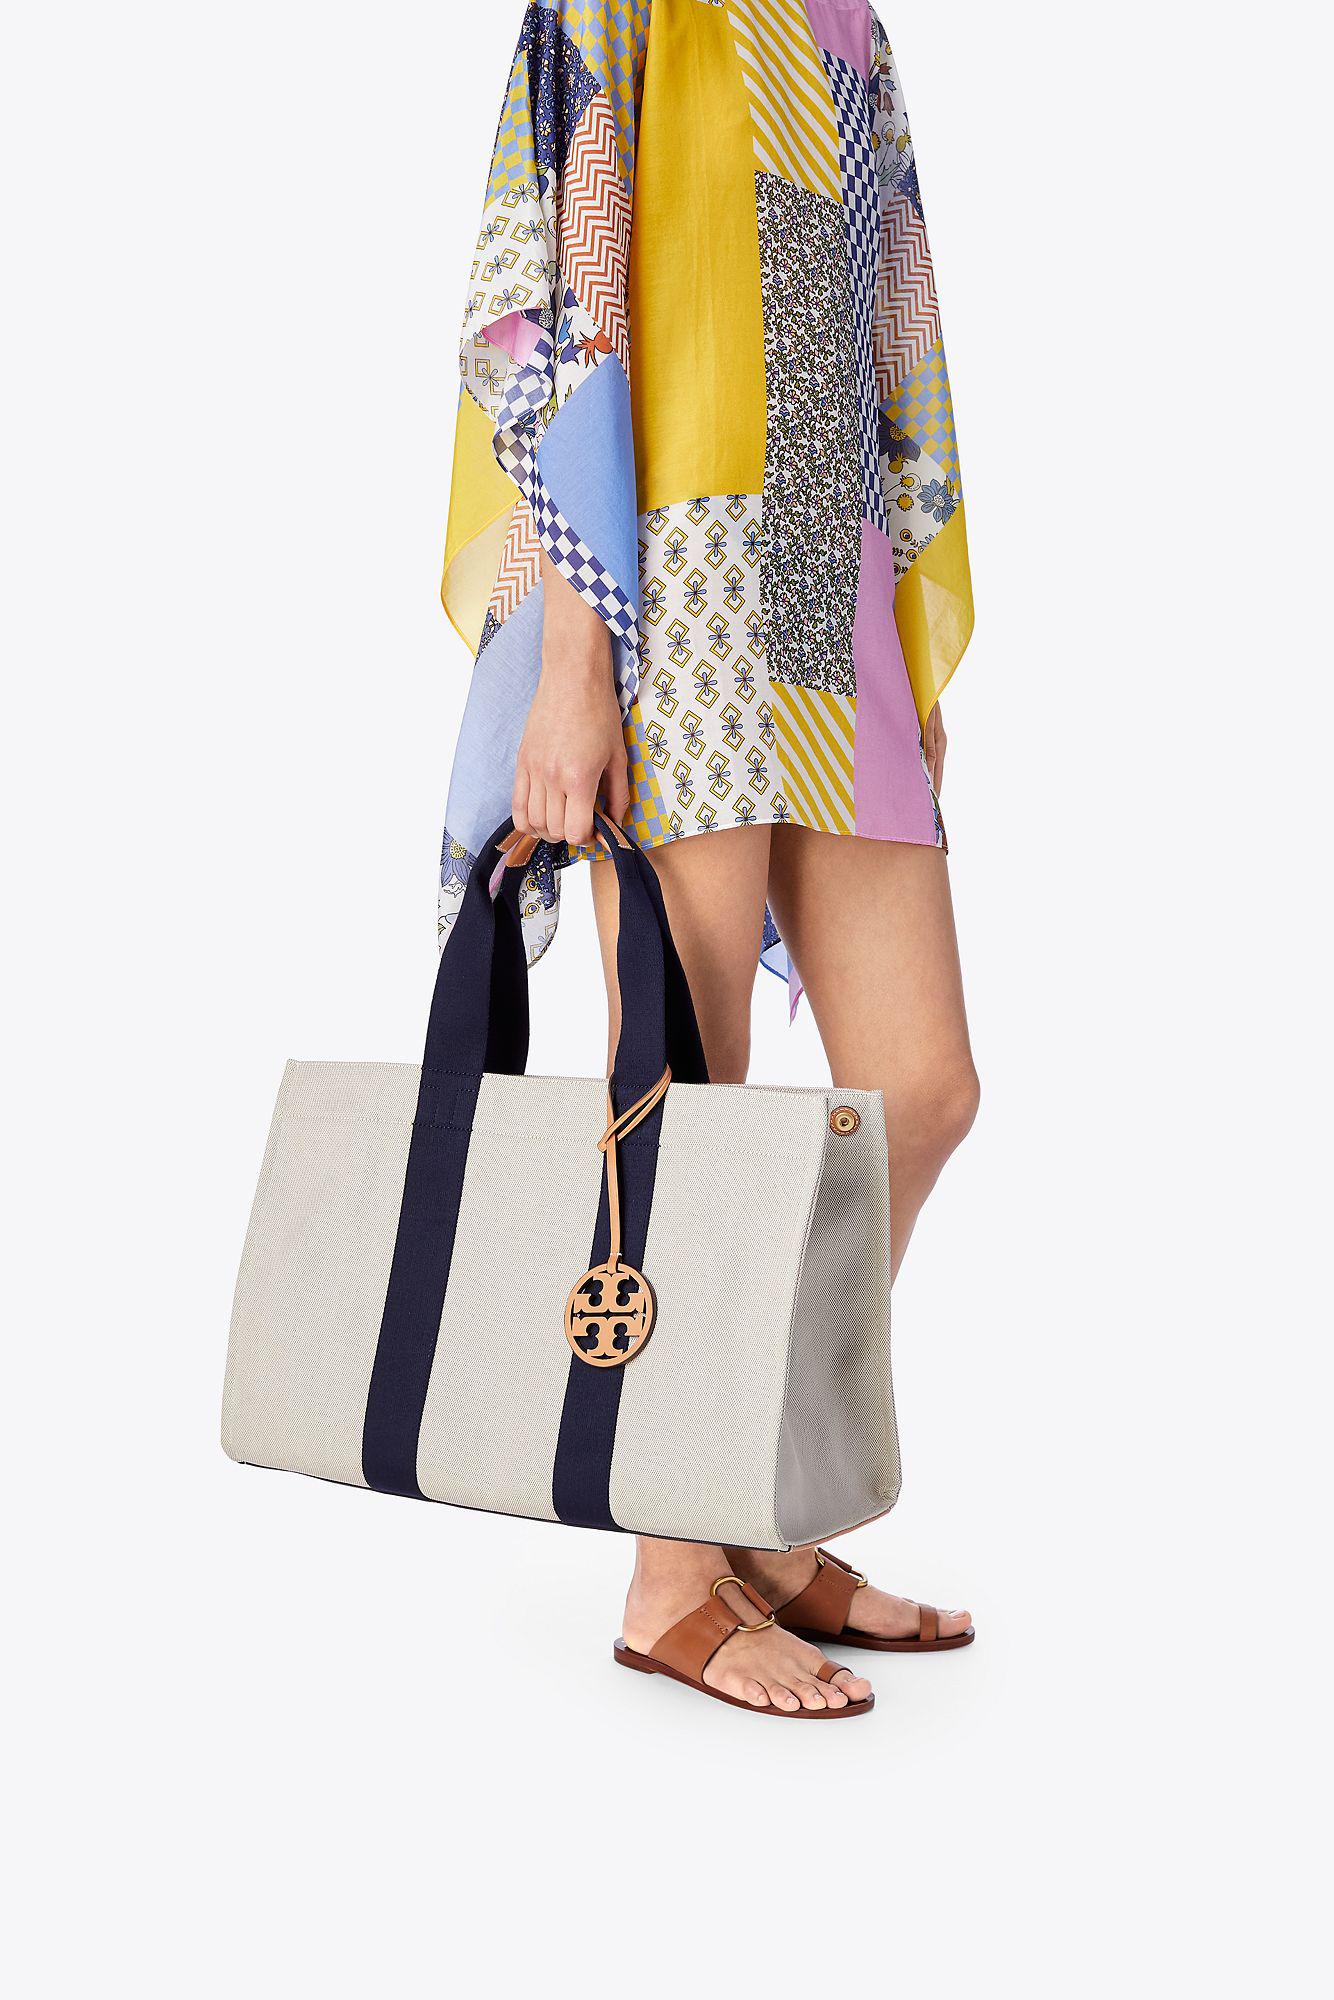 Tory Burch Miller Large Canvas Tote in Blue - Lyst